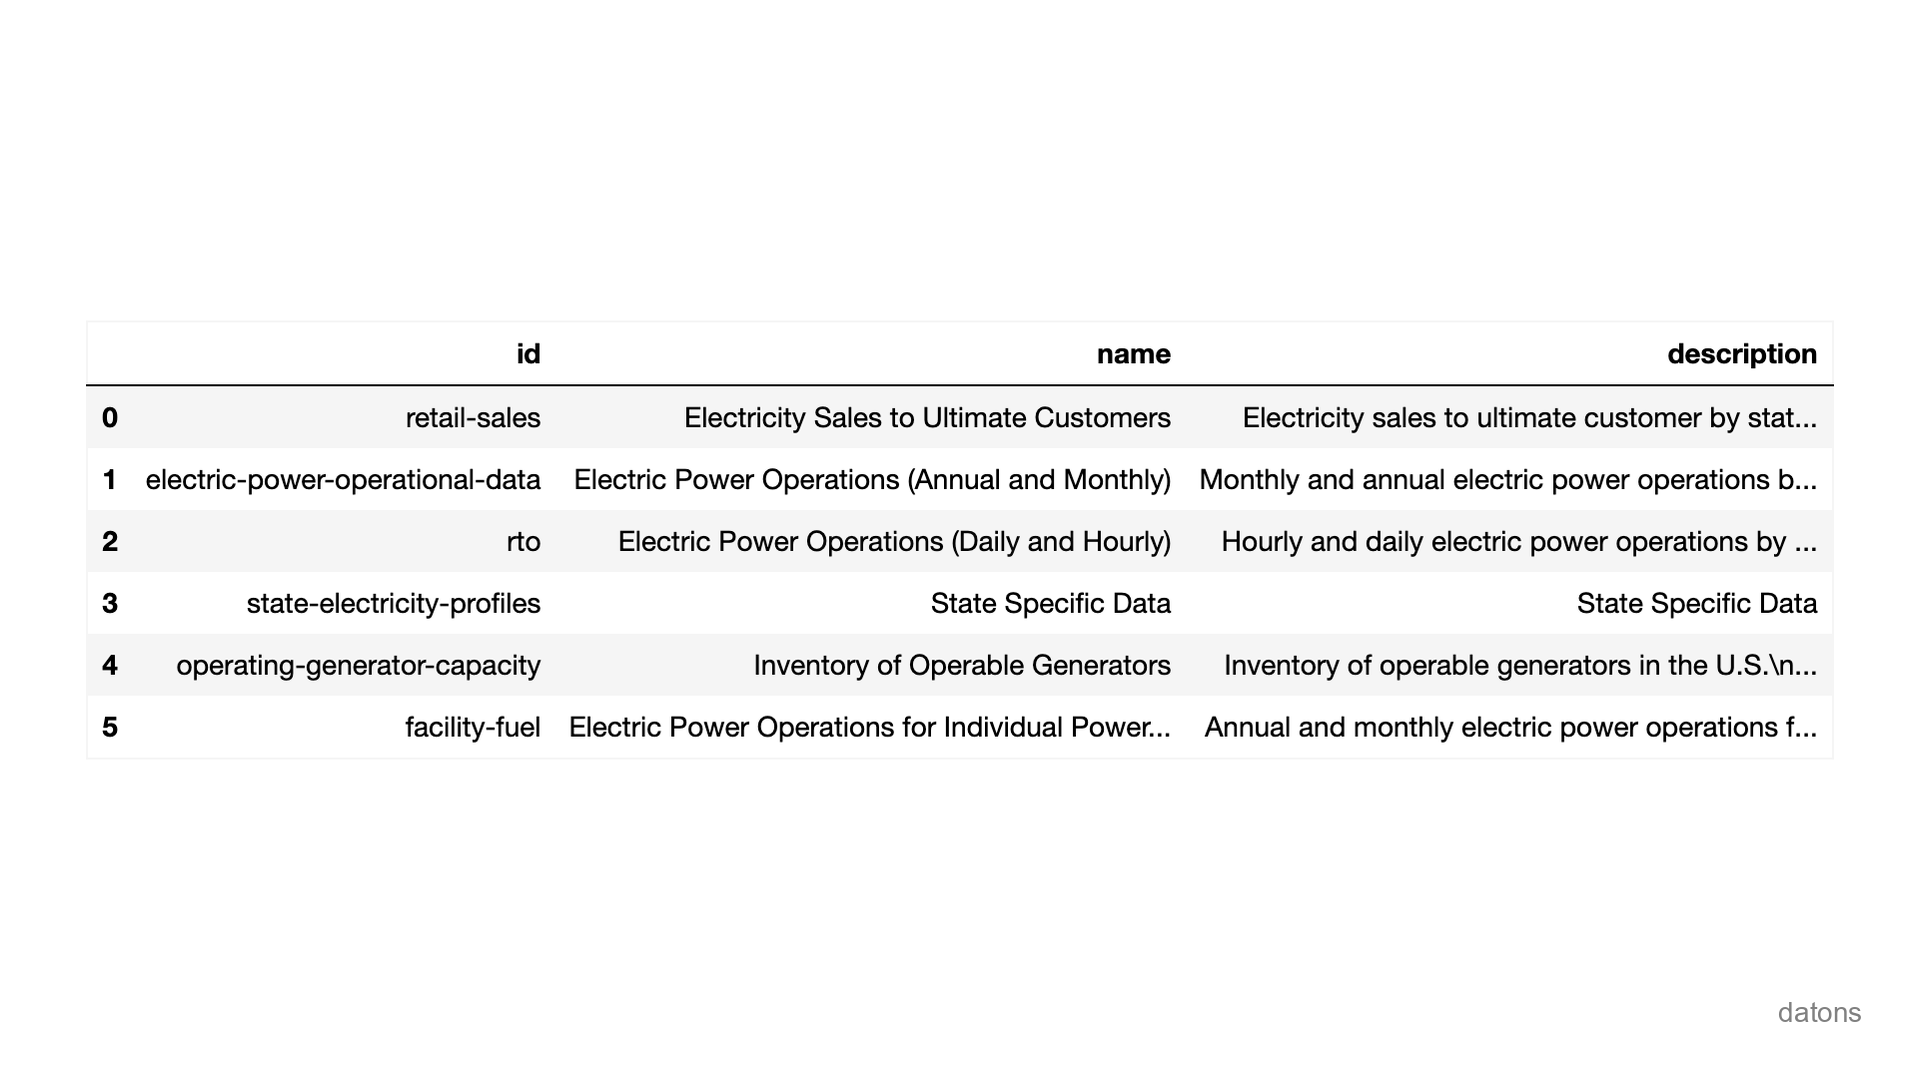 Nested categories within electricity endpoint